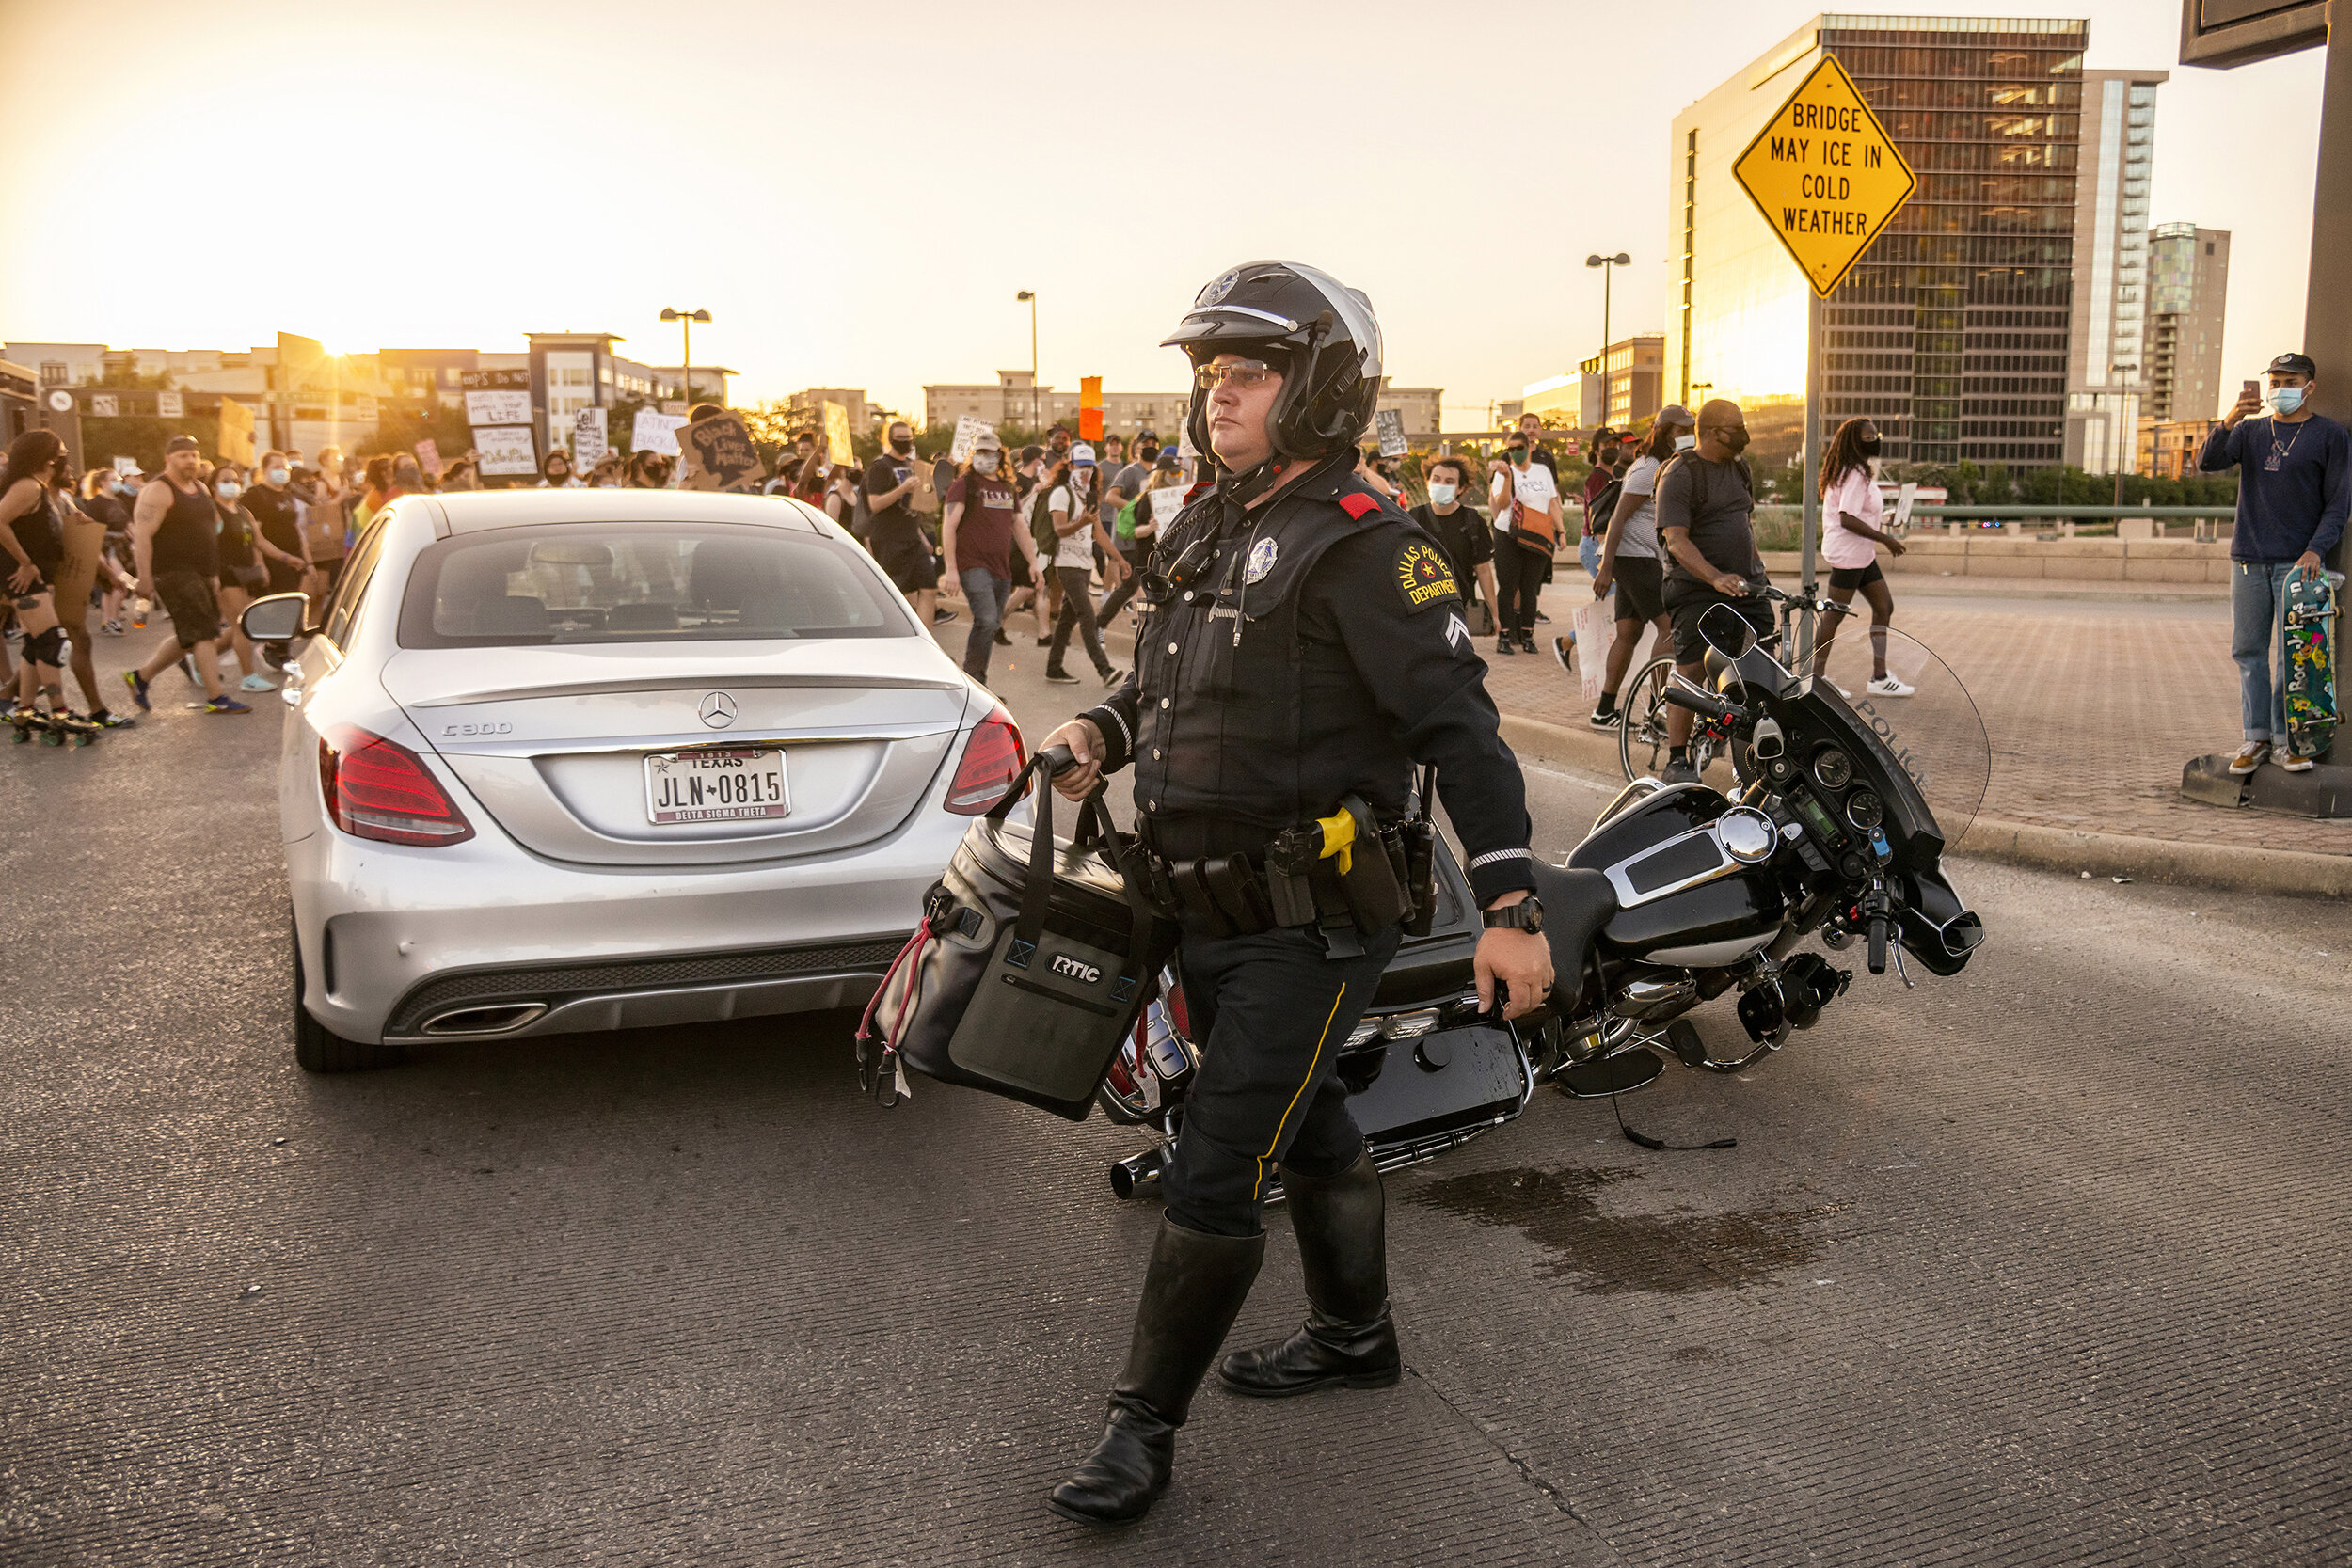  A Dallas police officer carries a cooler after a motorist crashed into a police motorcycle during the Ride for Justice protest in Dallas, TX on June 13, 2020.  Cyclists, skaters, rollerbladers and skateboarders rolled ahead of a pedestrian protest t